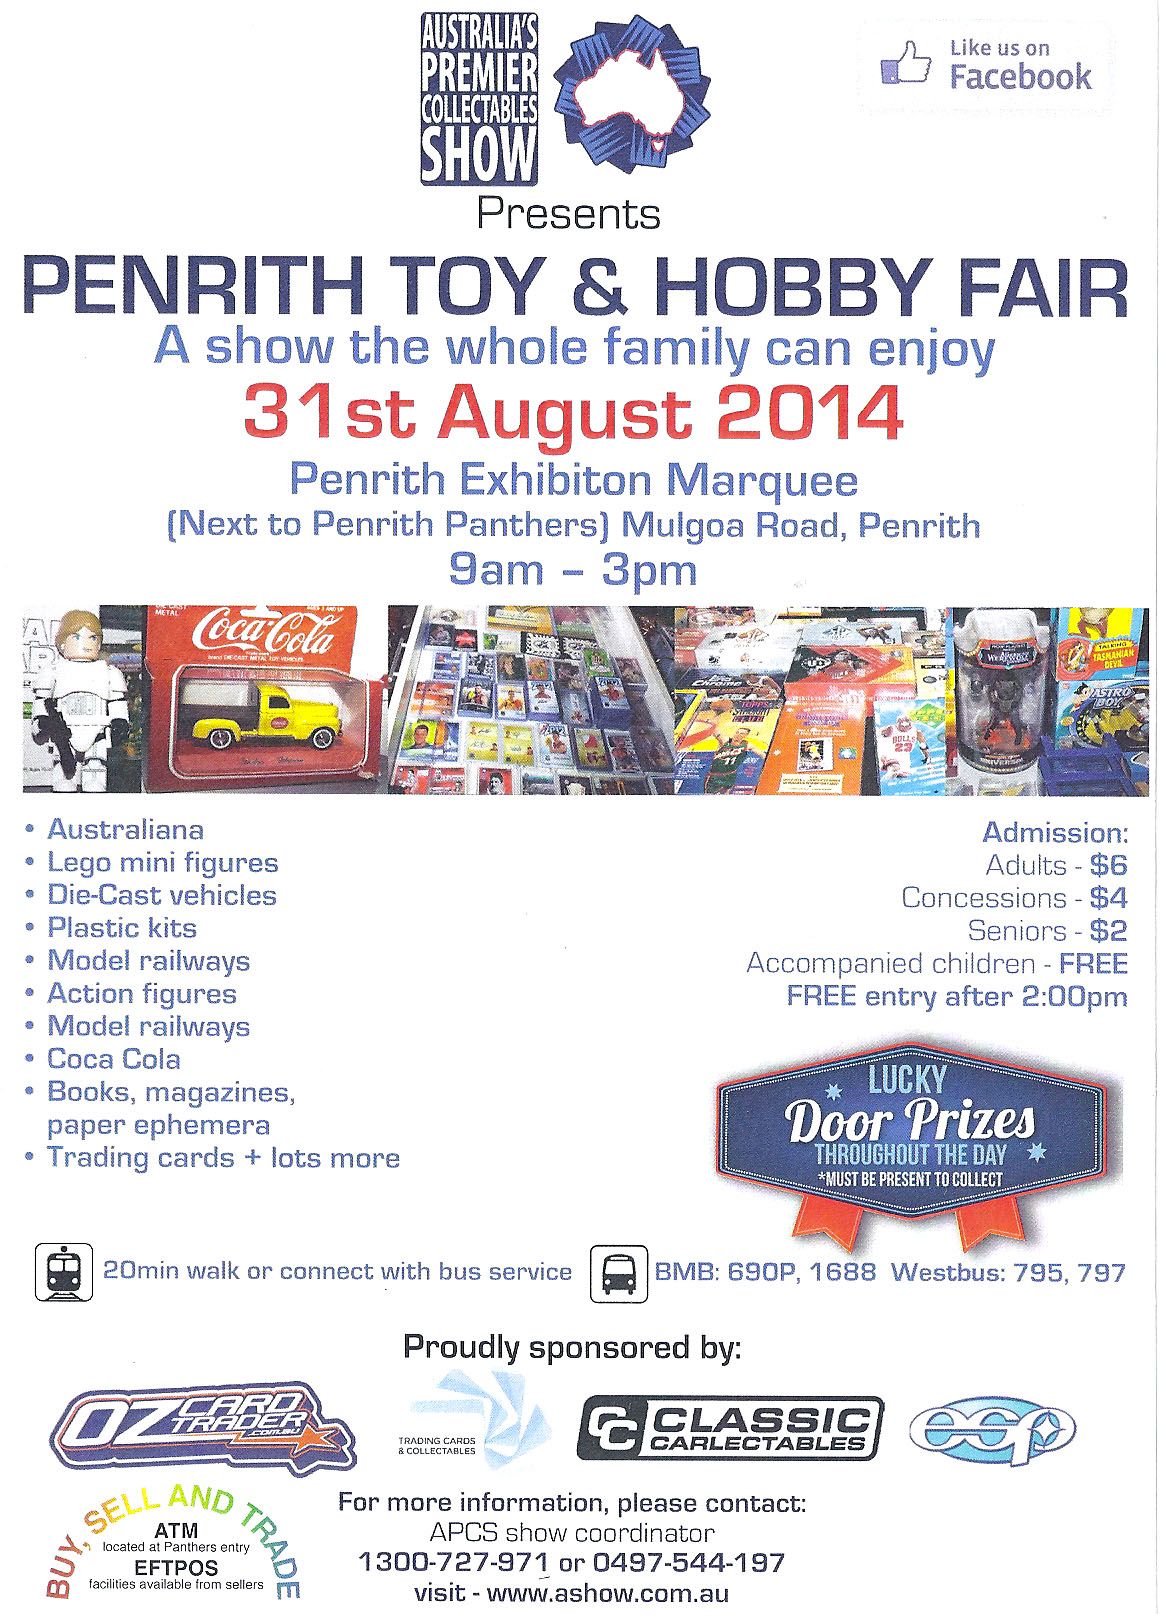 penrith_toy_hobby_fair_31st_august_2014_penrith_exhibition_marquee.jpg